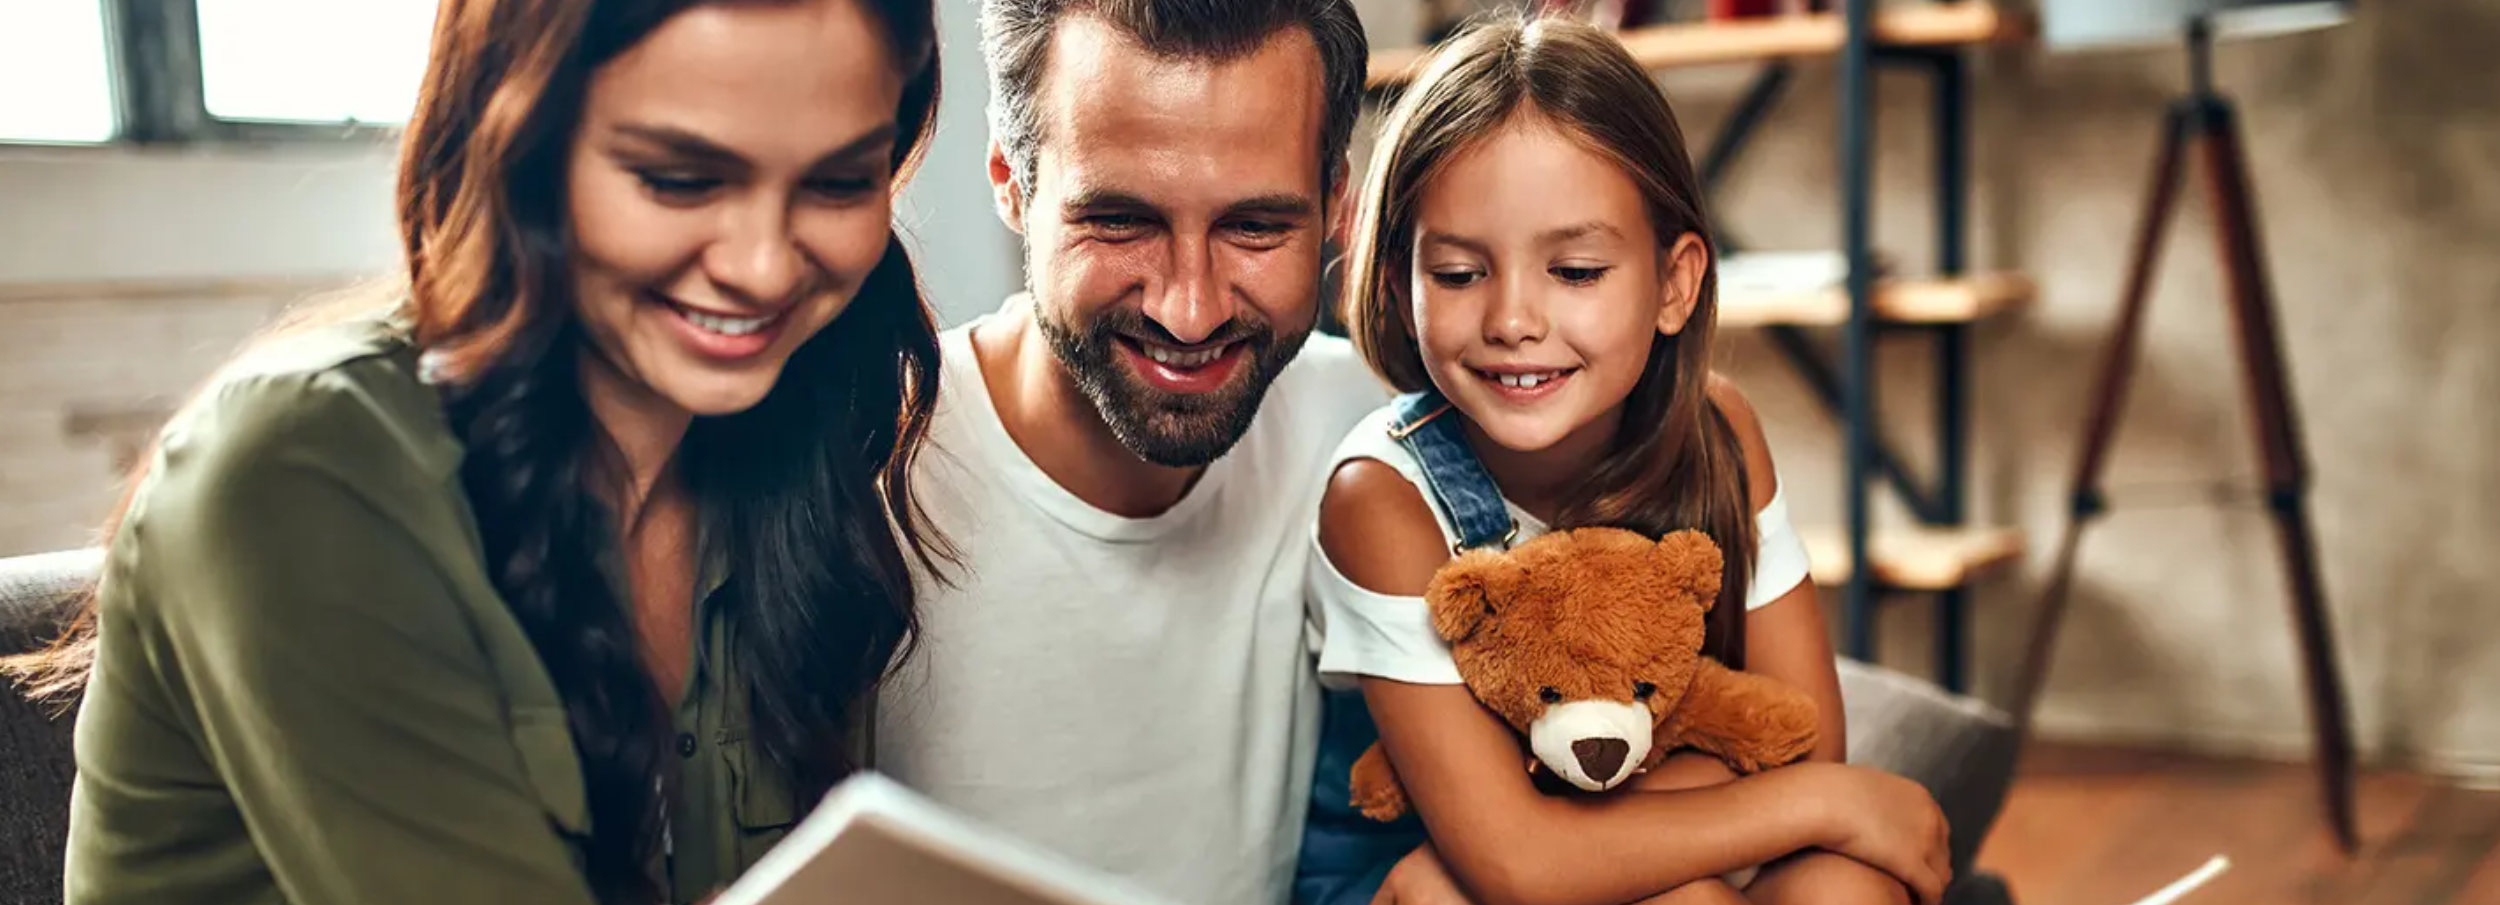 Smiling couple reading storybook to daughter holding teddy bear in living room interior.